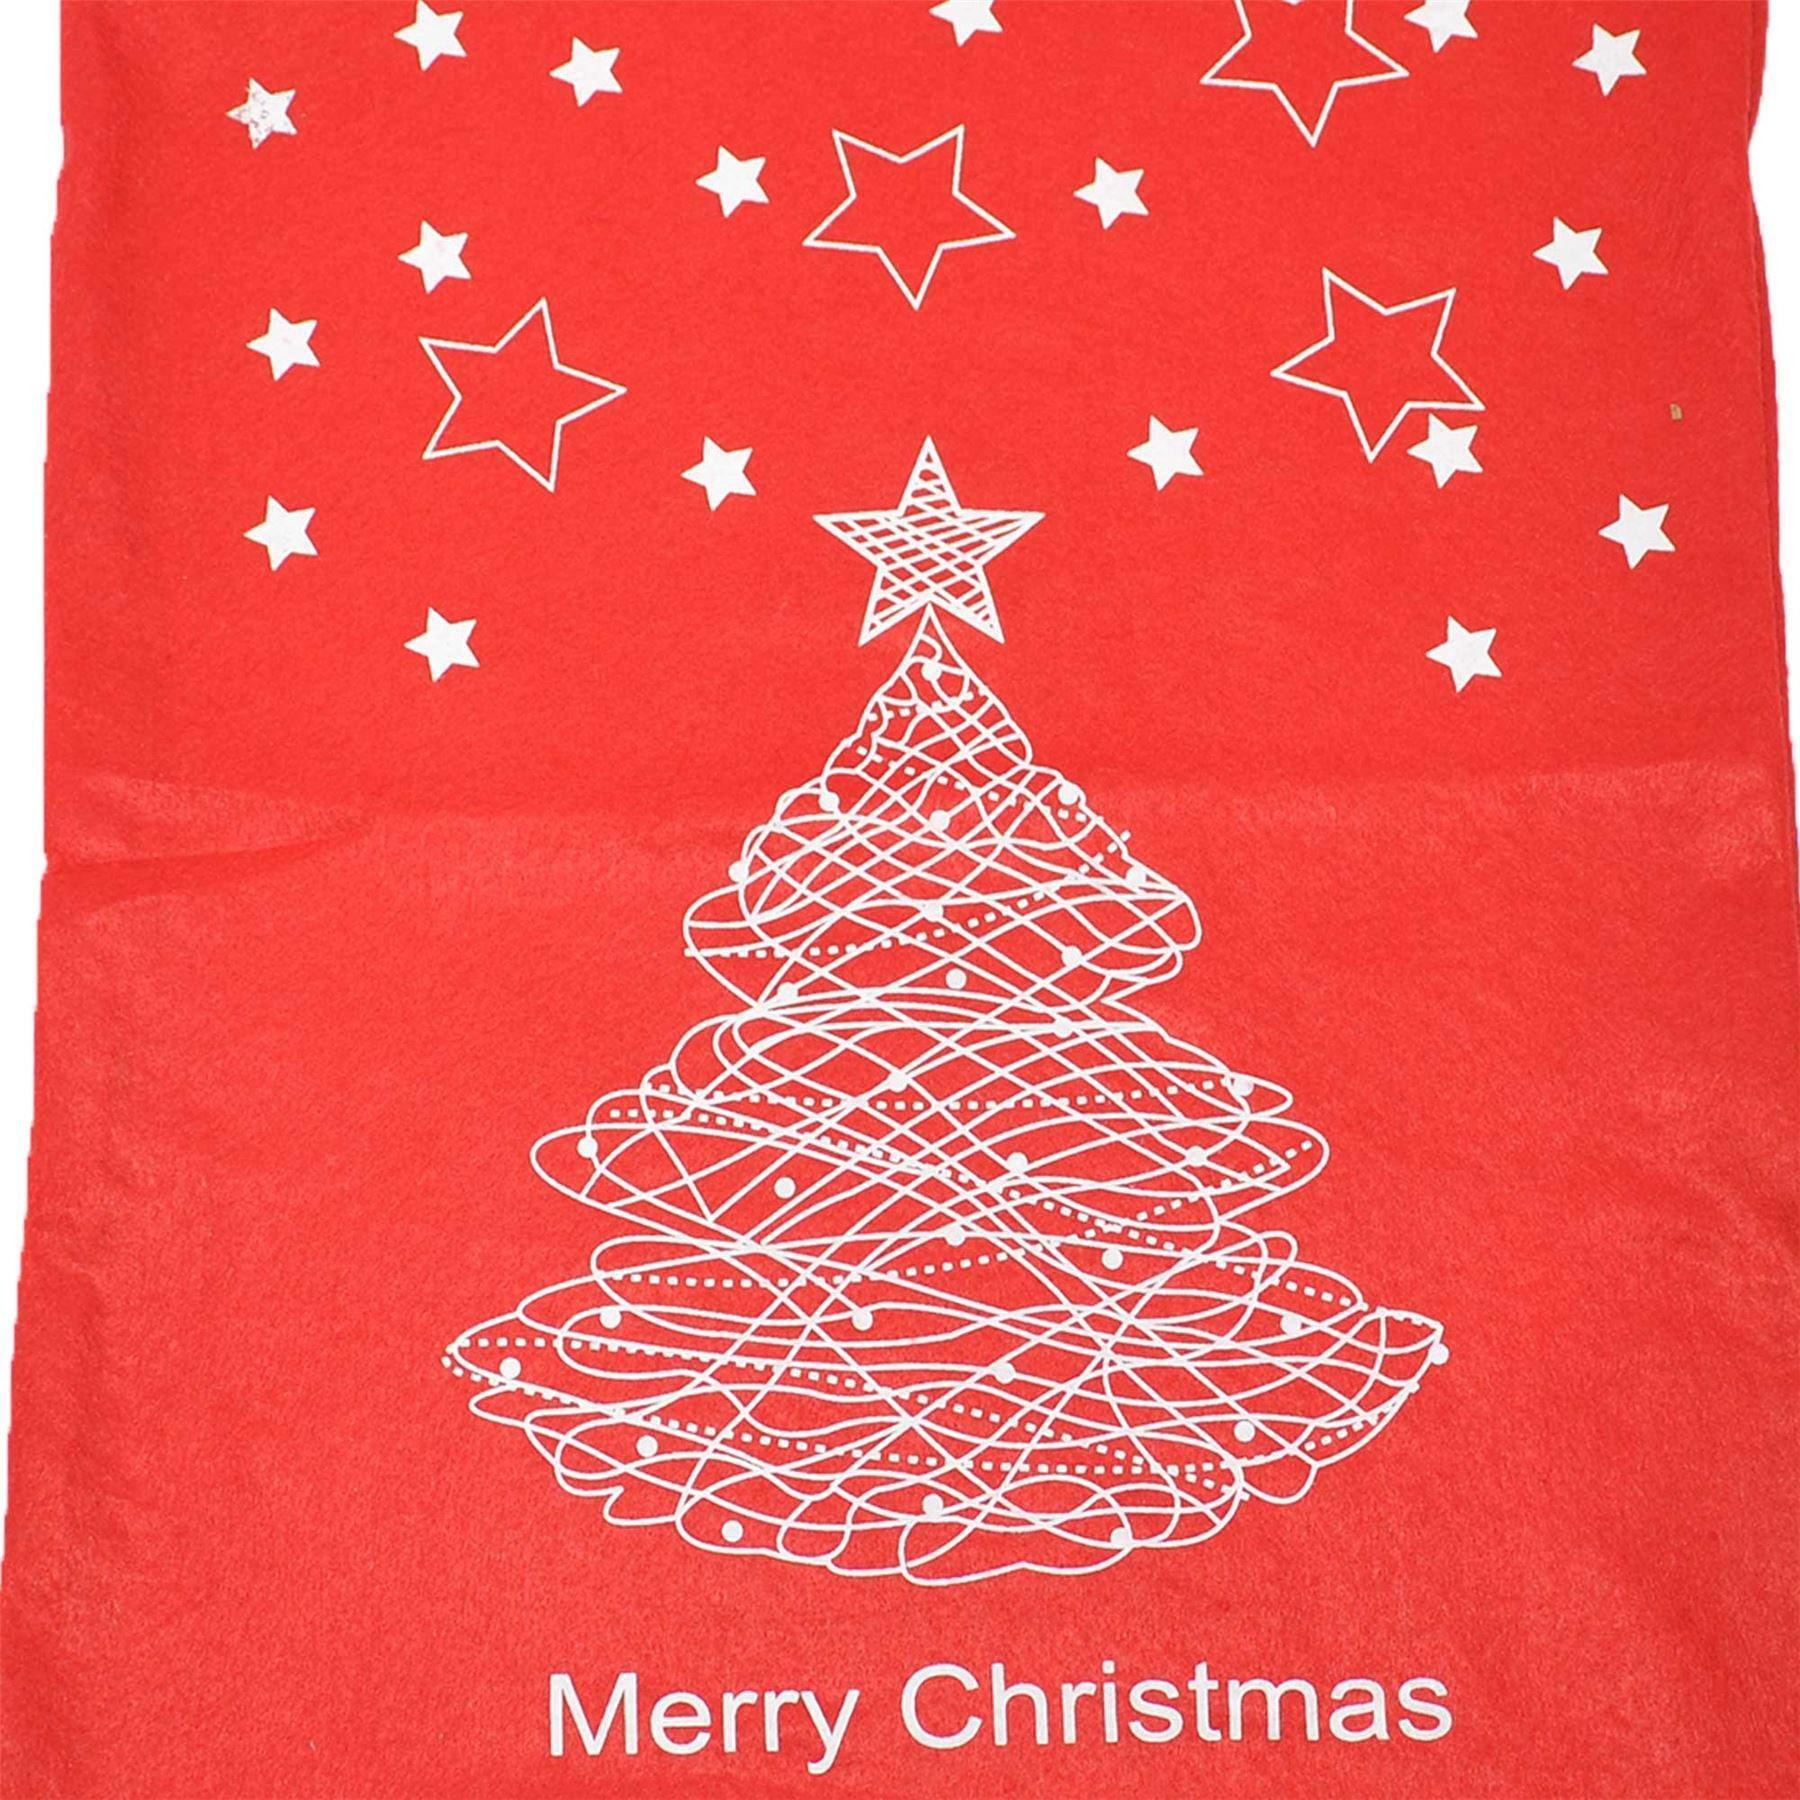 Merry Traditional Large Santa Sack Father Christmas Stocking Socks Gifts Bag Felt Xmas Accessories 60 x 45cm Toys Sweets - image 1